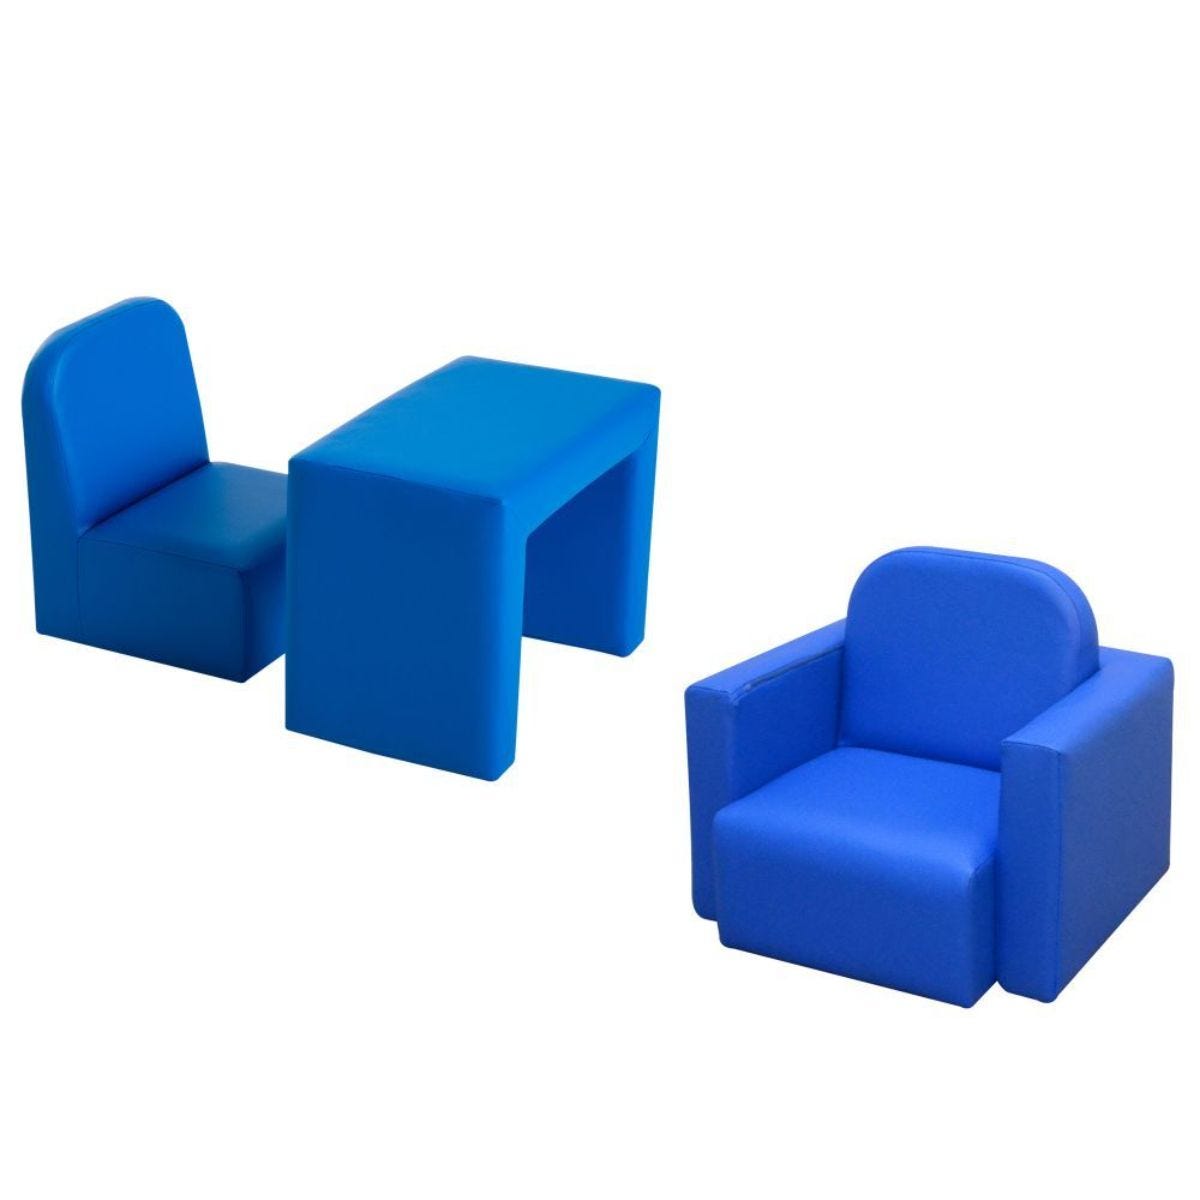 Kids Mini Sofa 2 In 1 Table And Chair Set Blue